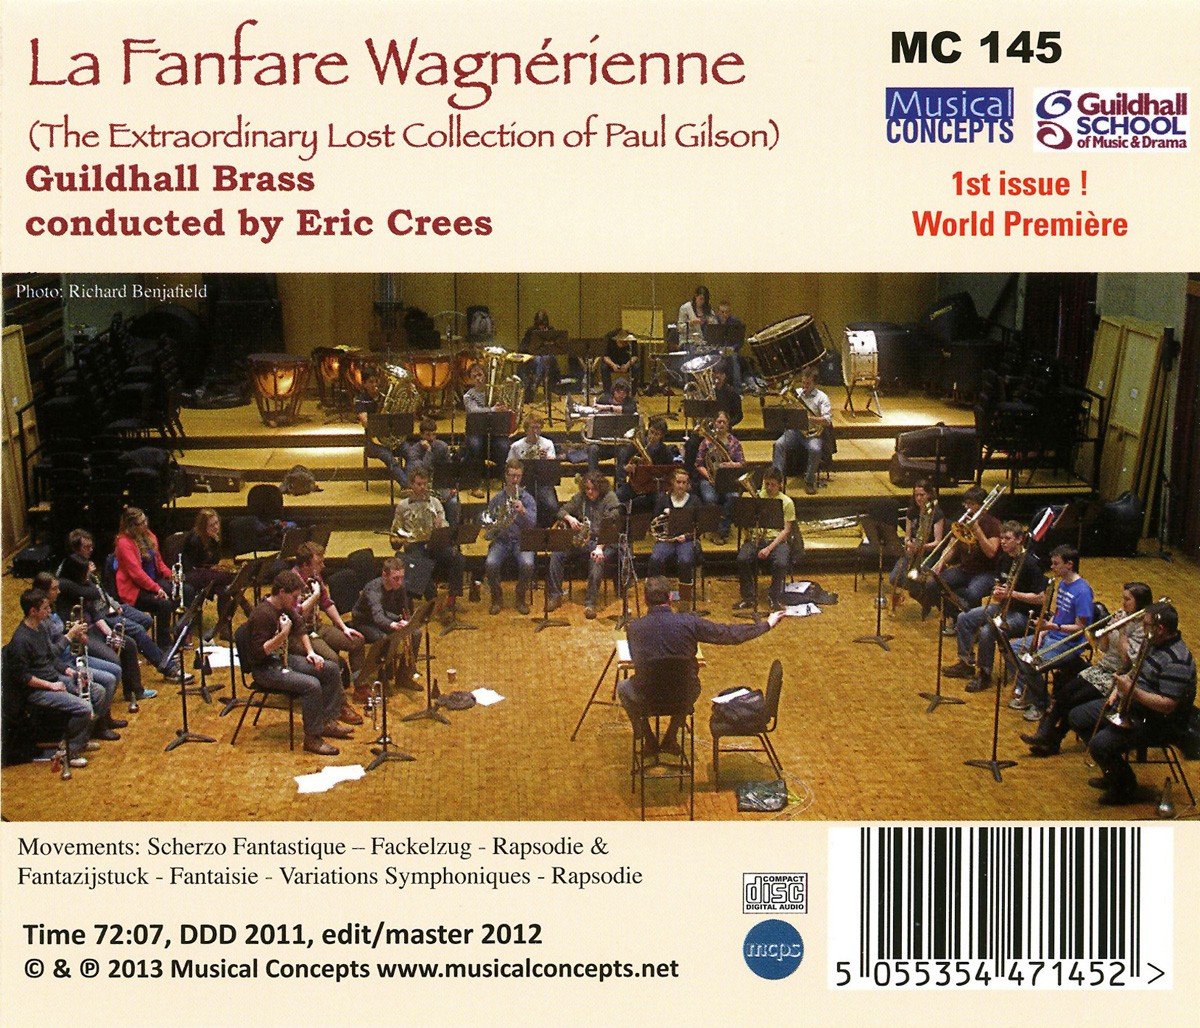 LA FANFARE WAGNERIENNE (THE EXTRAORDINARY LOST COLLECTION OF PAUL GILSON)